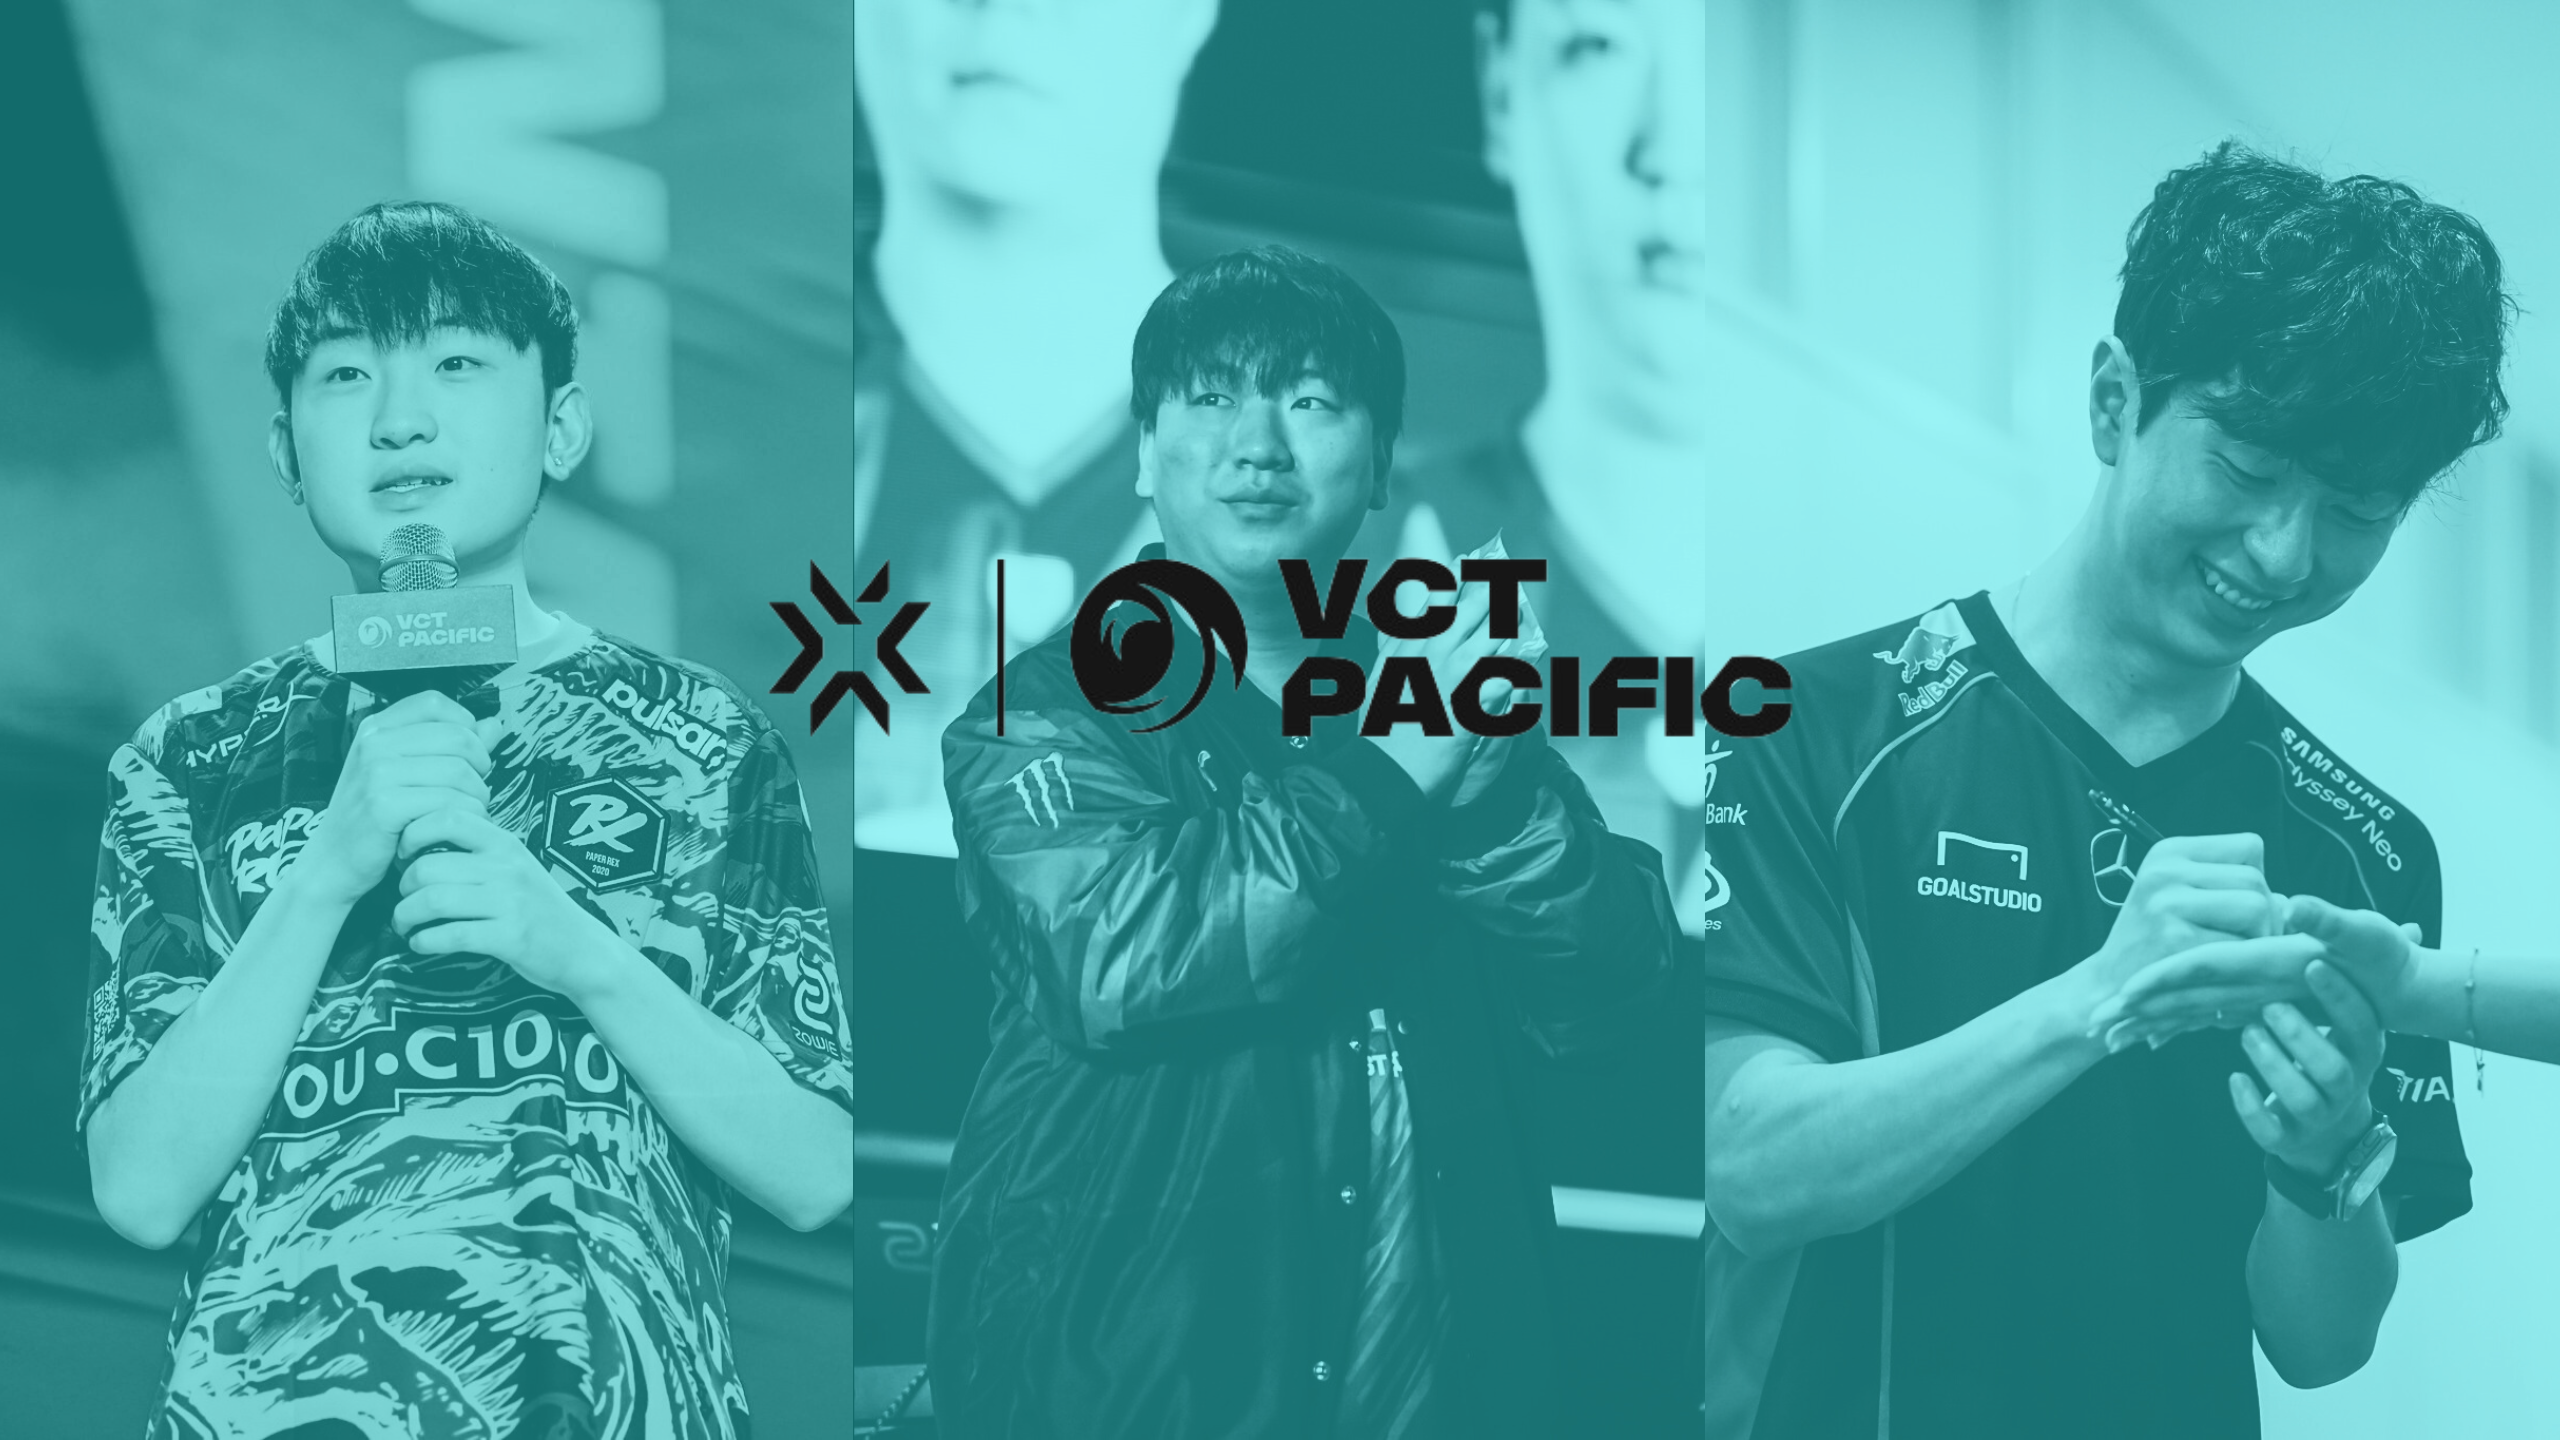 VCT Pacific League Finals Week Preview and Predictions